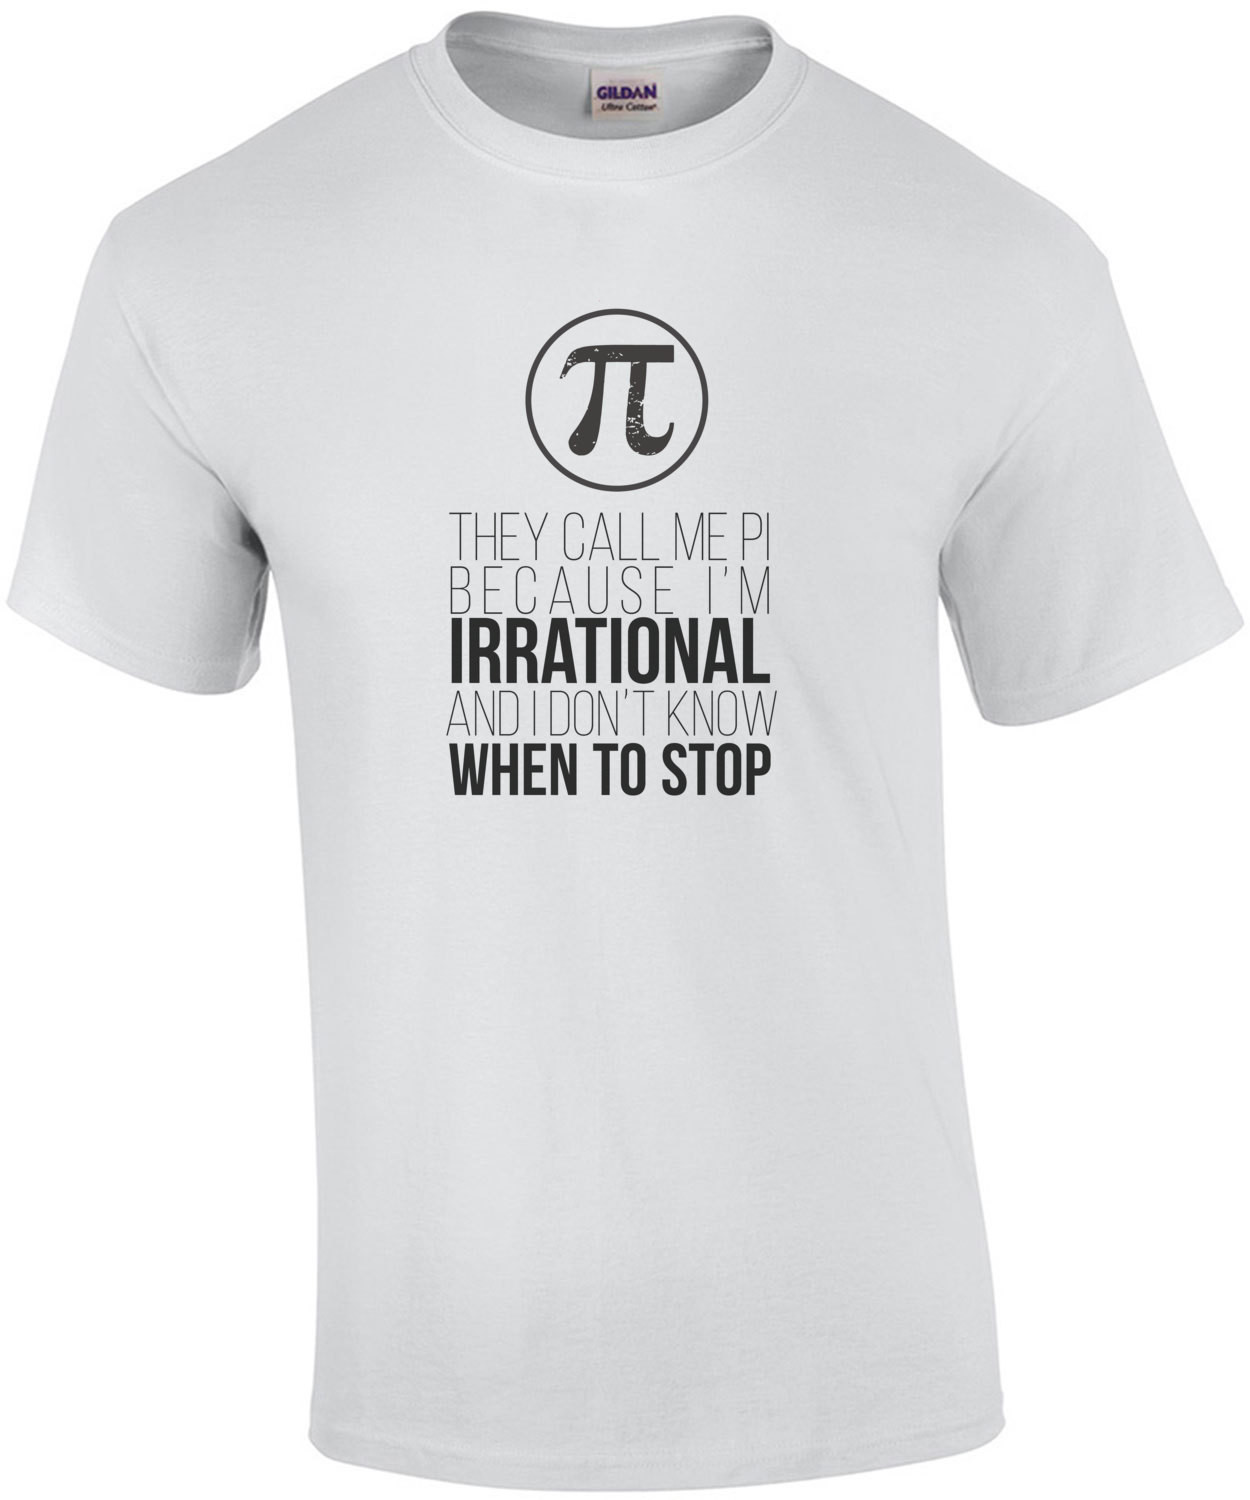 They call me Pi because I'm irrational and I don't know when to stop - funny pi t-shirt